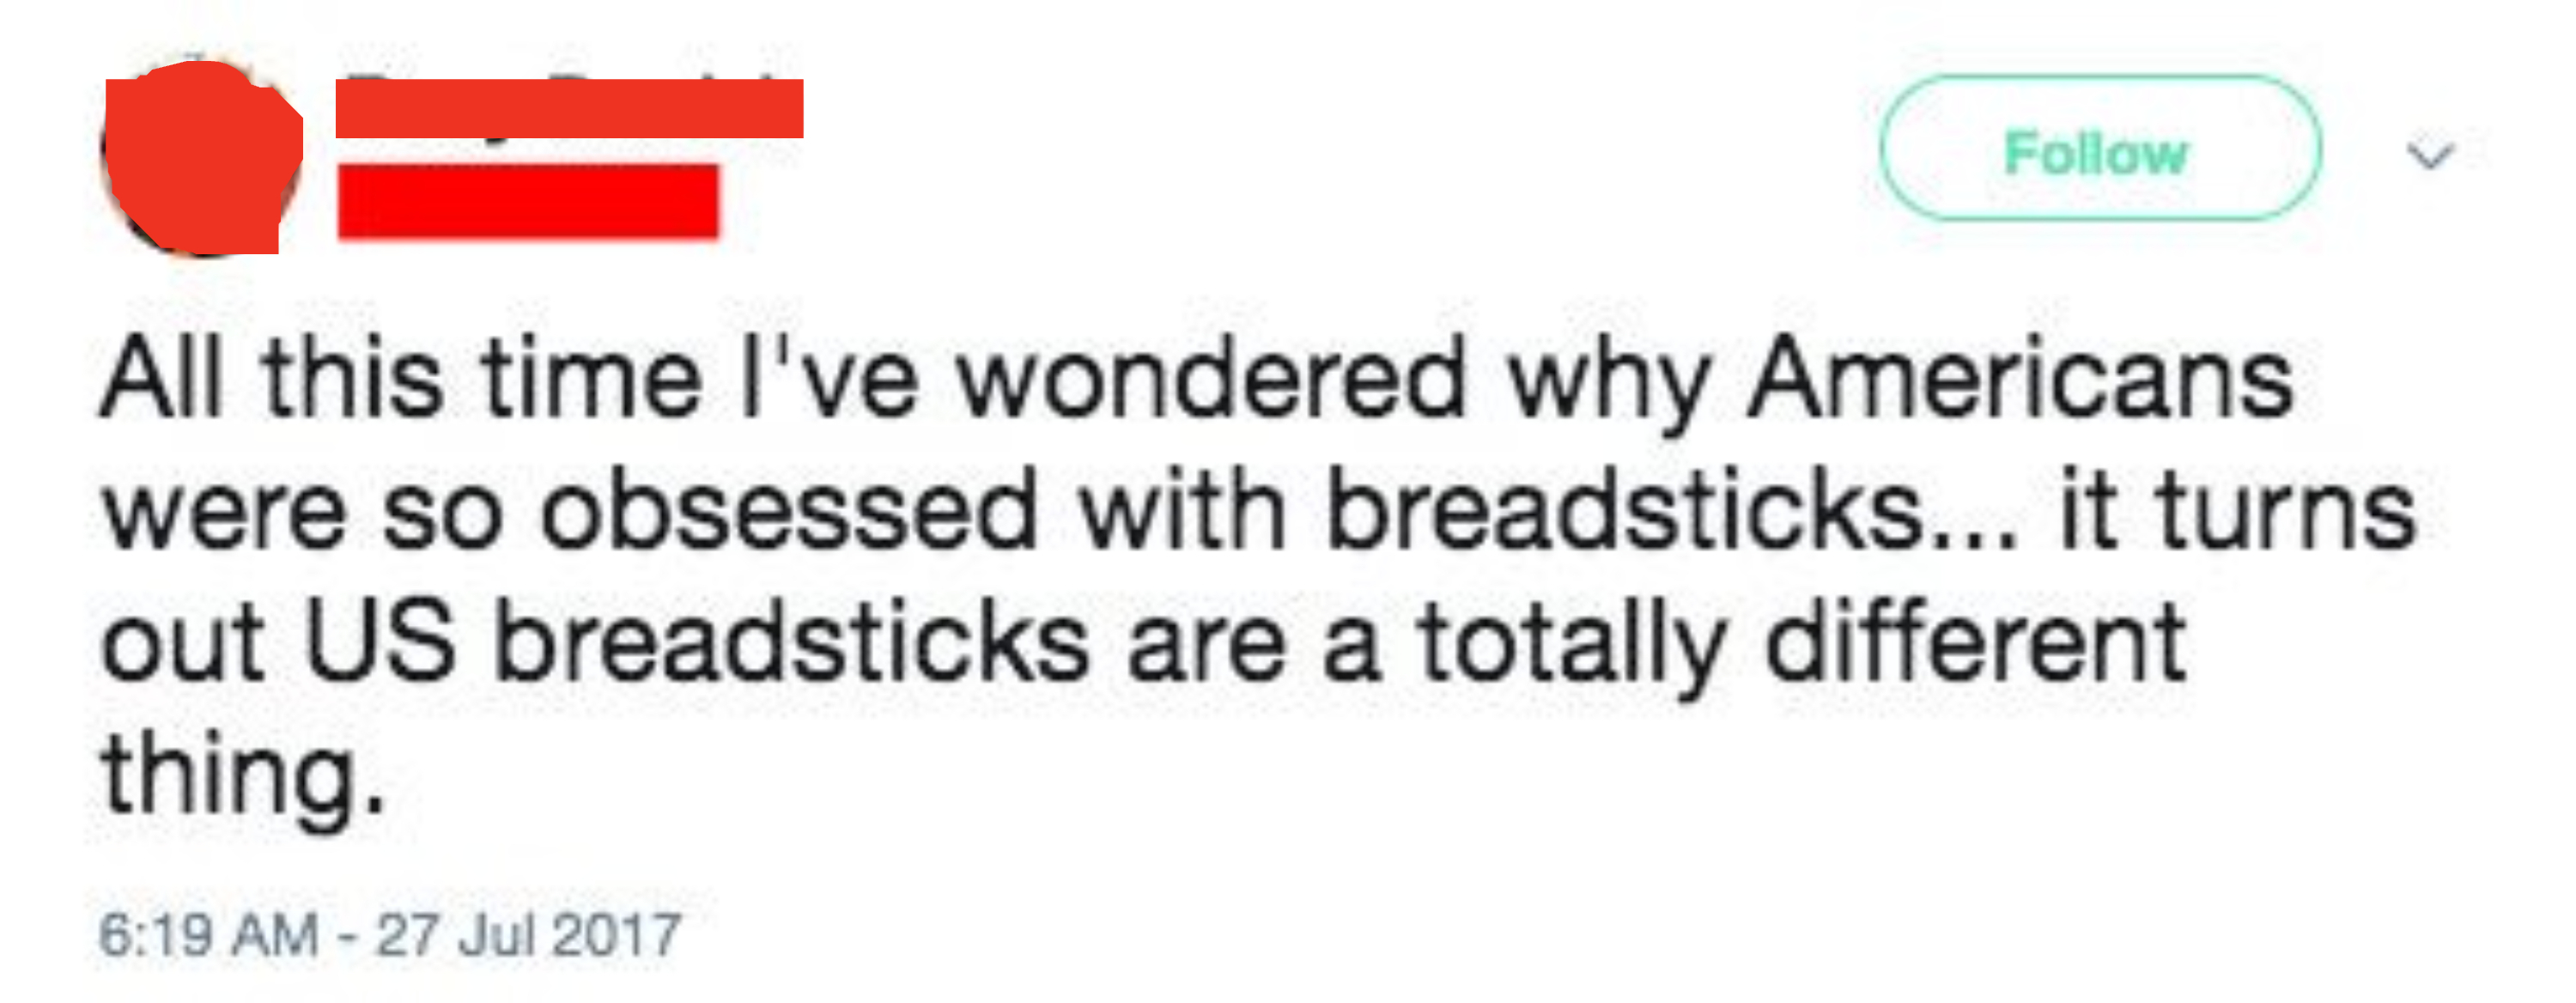 All this time I&#x27;ve wondered why Americans were so obsessed with breadsticks; it turns out US breadsticks are a totally different thing